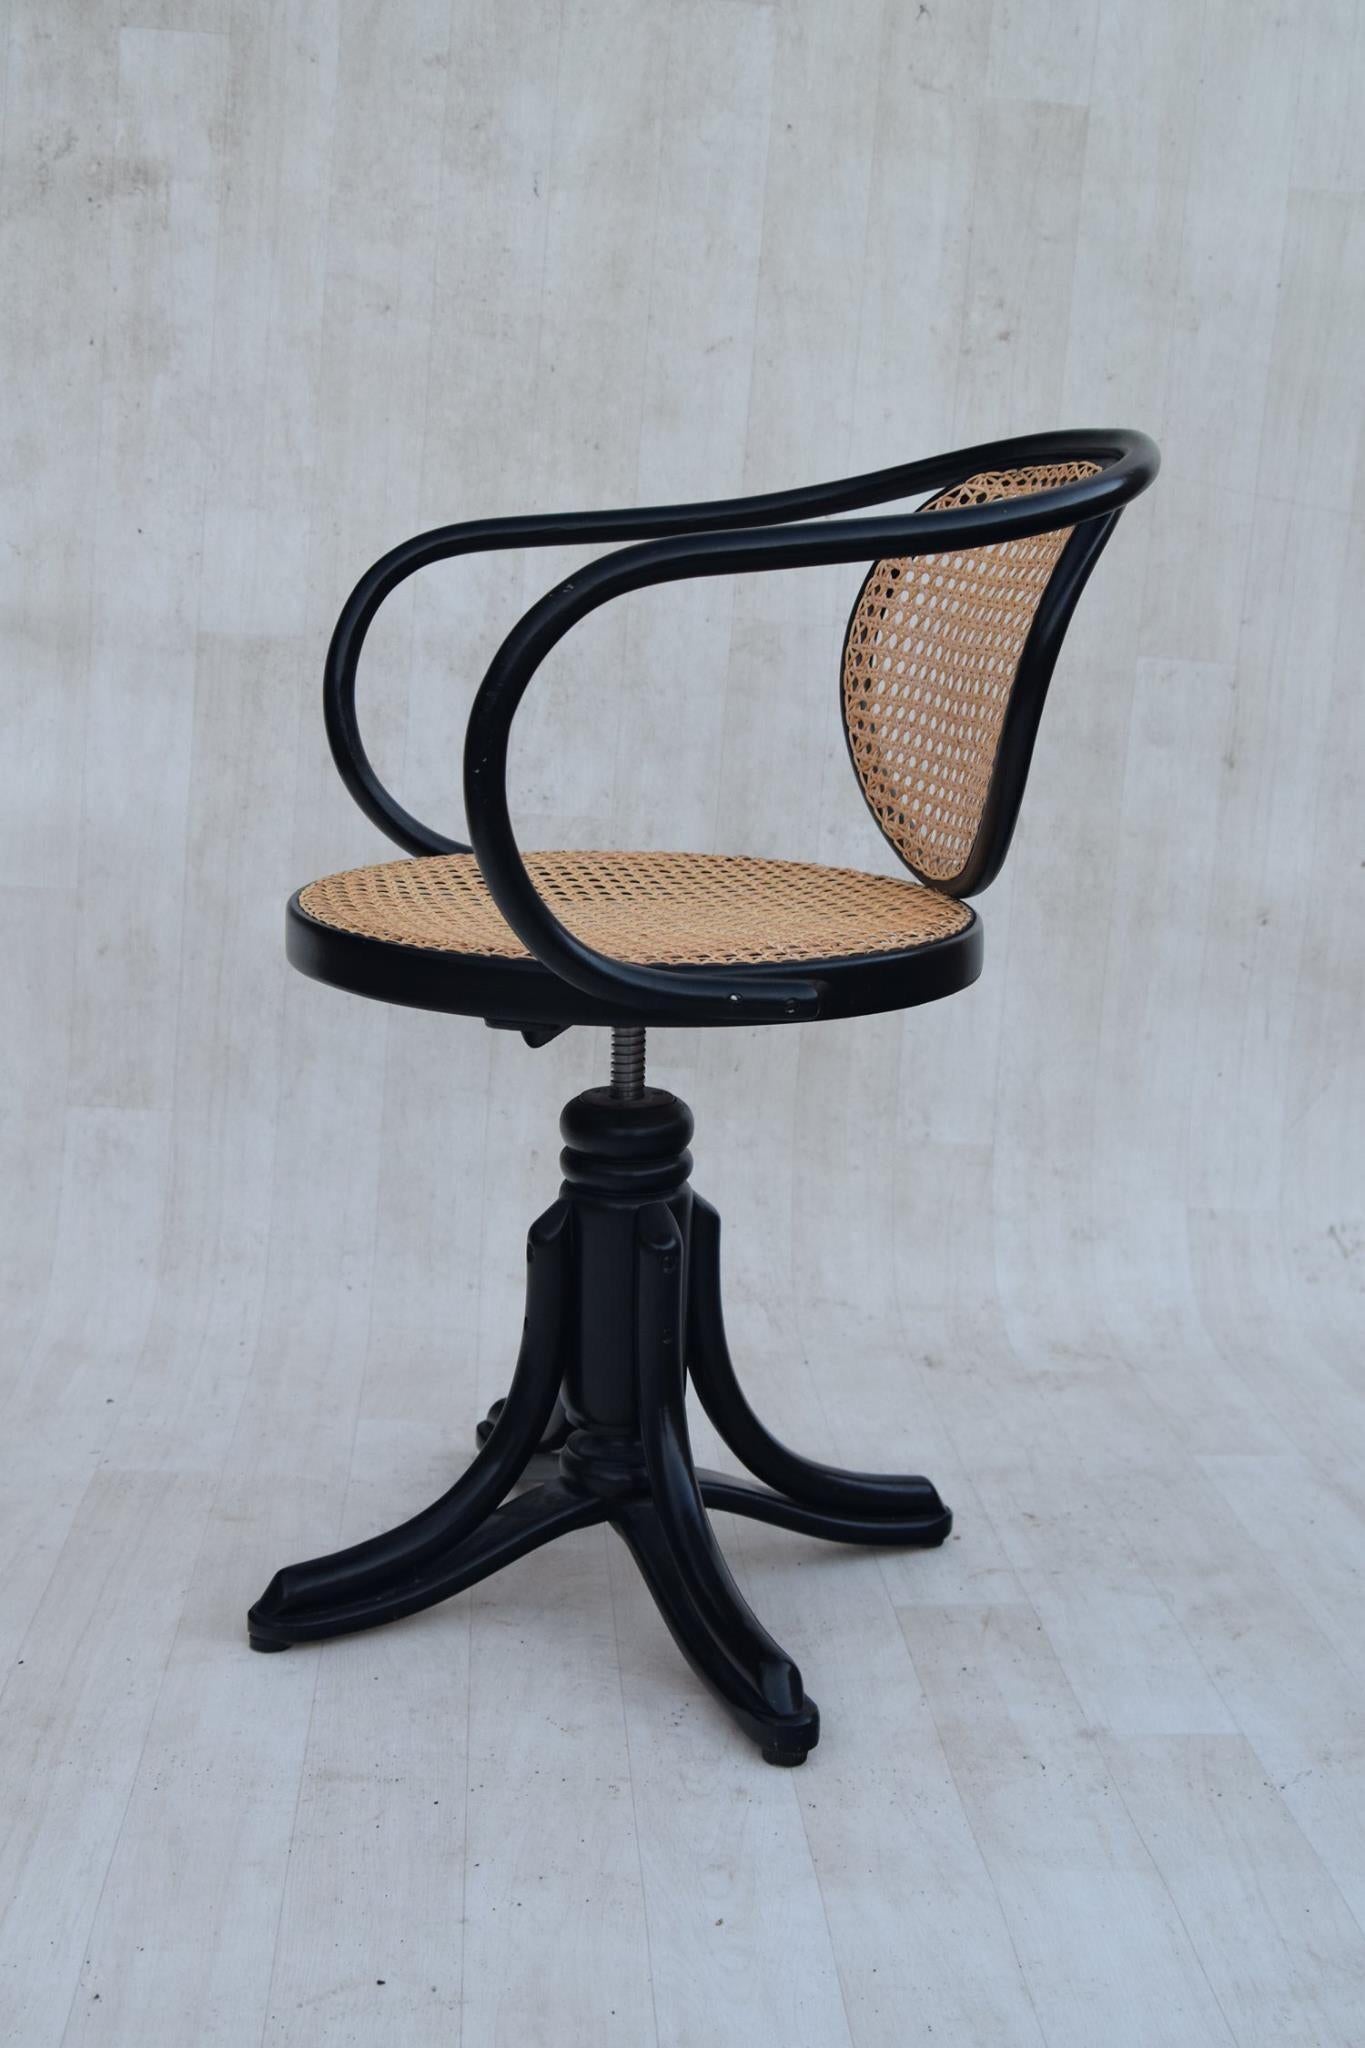 Thonet Bentwood swivel desk chair by ZPM Radomsko in black lacquer and rattan cane that was made in Poland. This lovely chair is in good vintage condition, with wear in all the right places. It swivels and it is height adjustable. It has a great